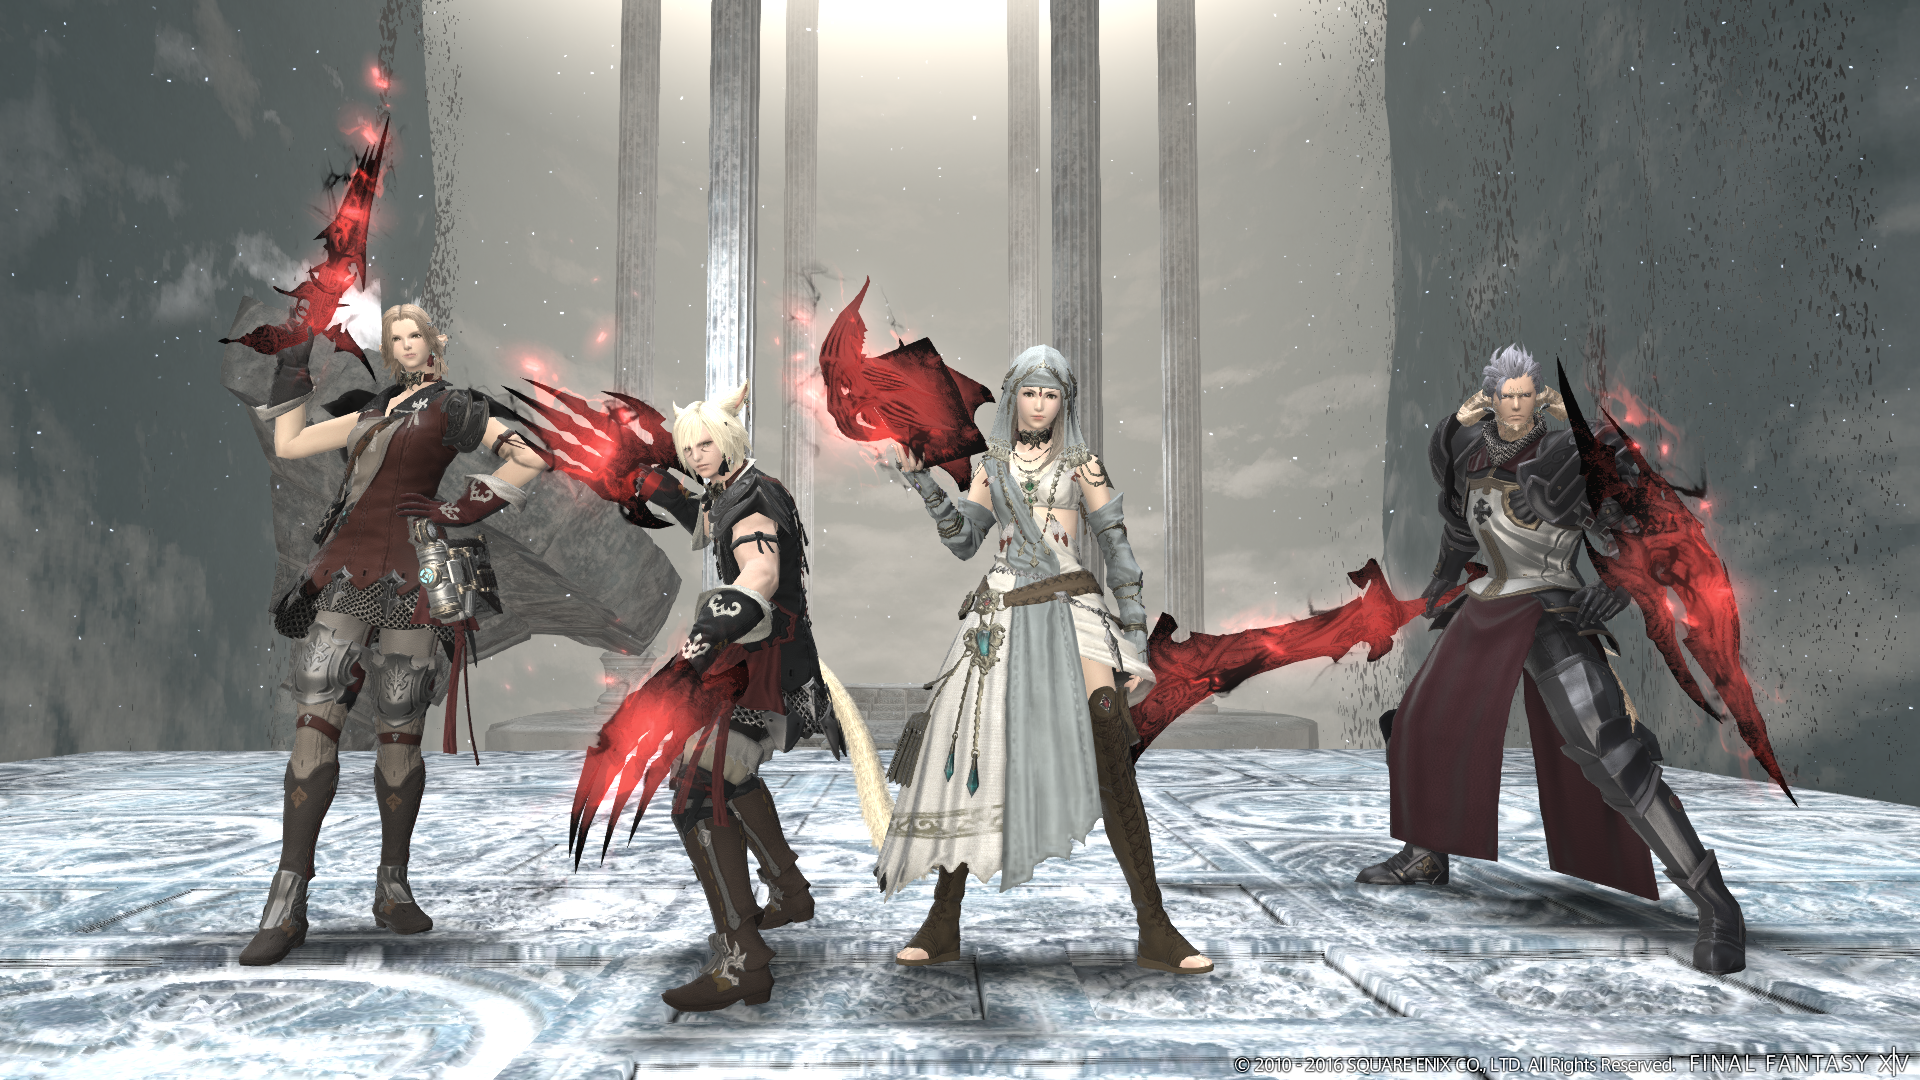 Final Fantasy XIV patch 3.45 adds more Palace of the Dead and Anima quests.